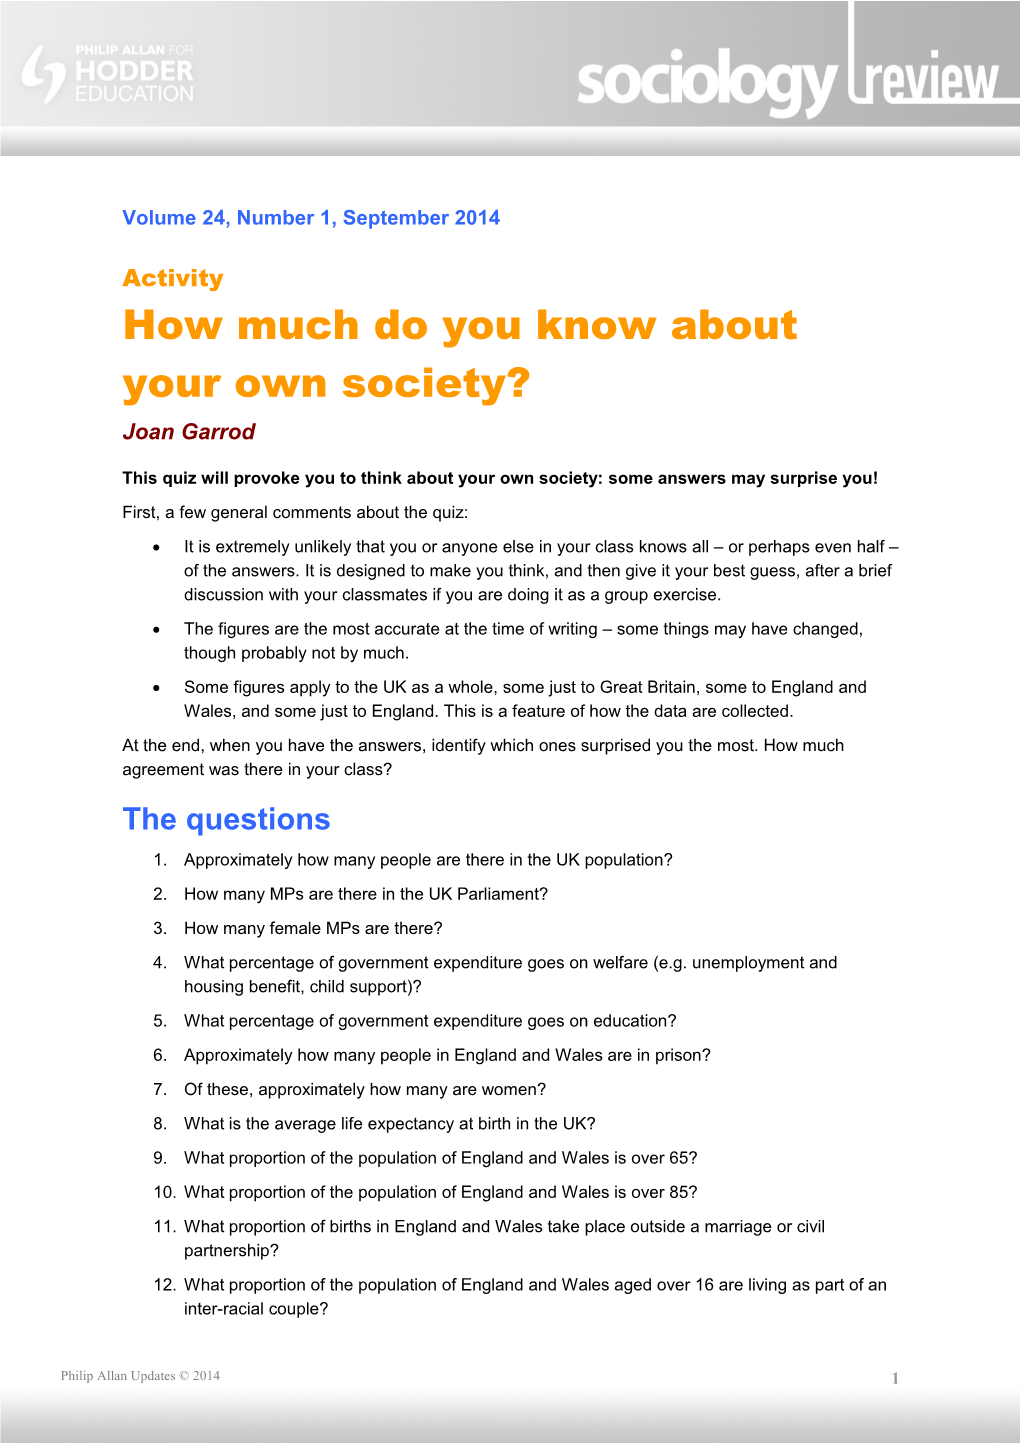 How Much Do You Know About Your Own Society?